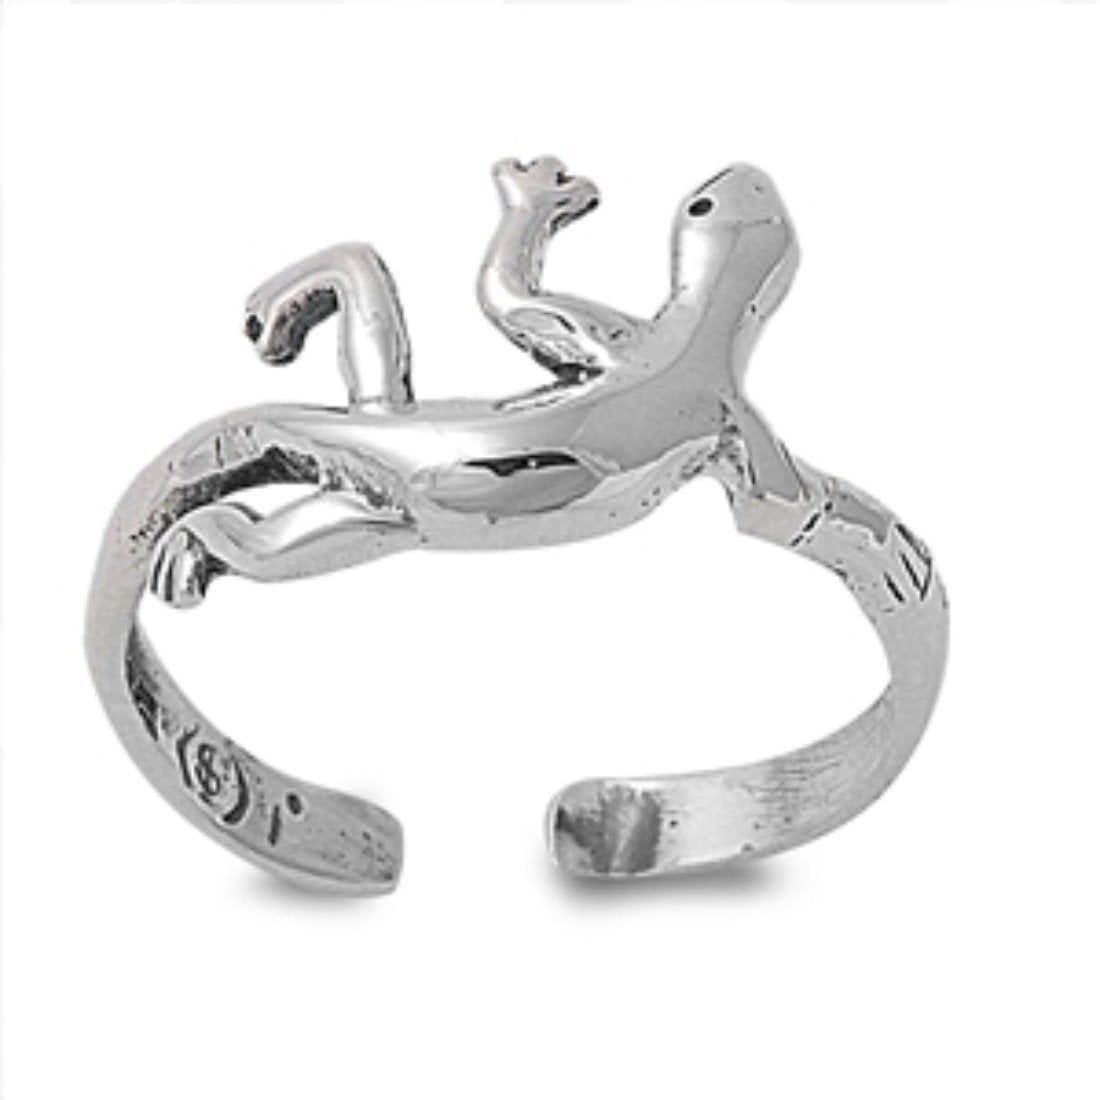 Adjustable Lizard Toe Ring Band 925 Sterling Silver (10mm)